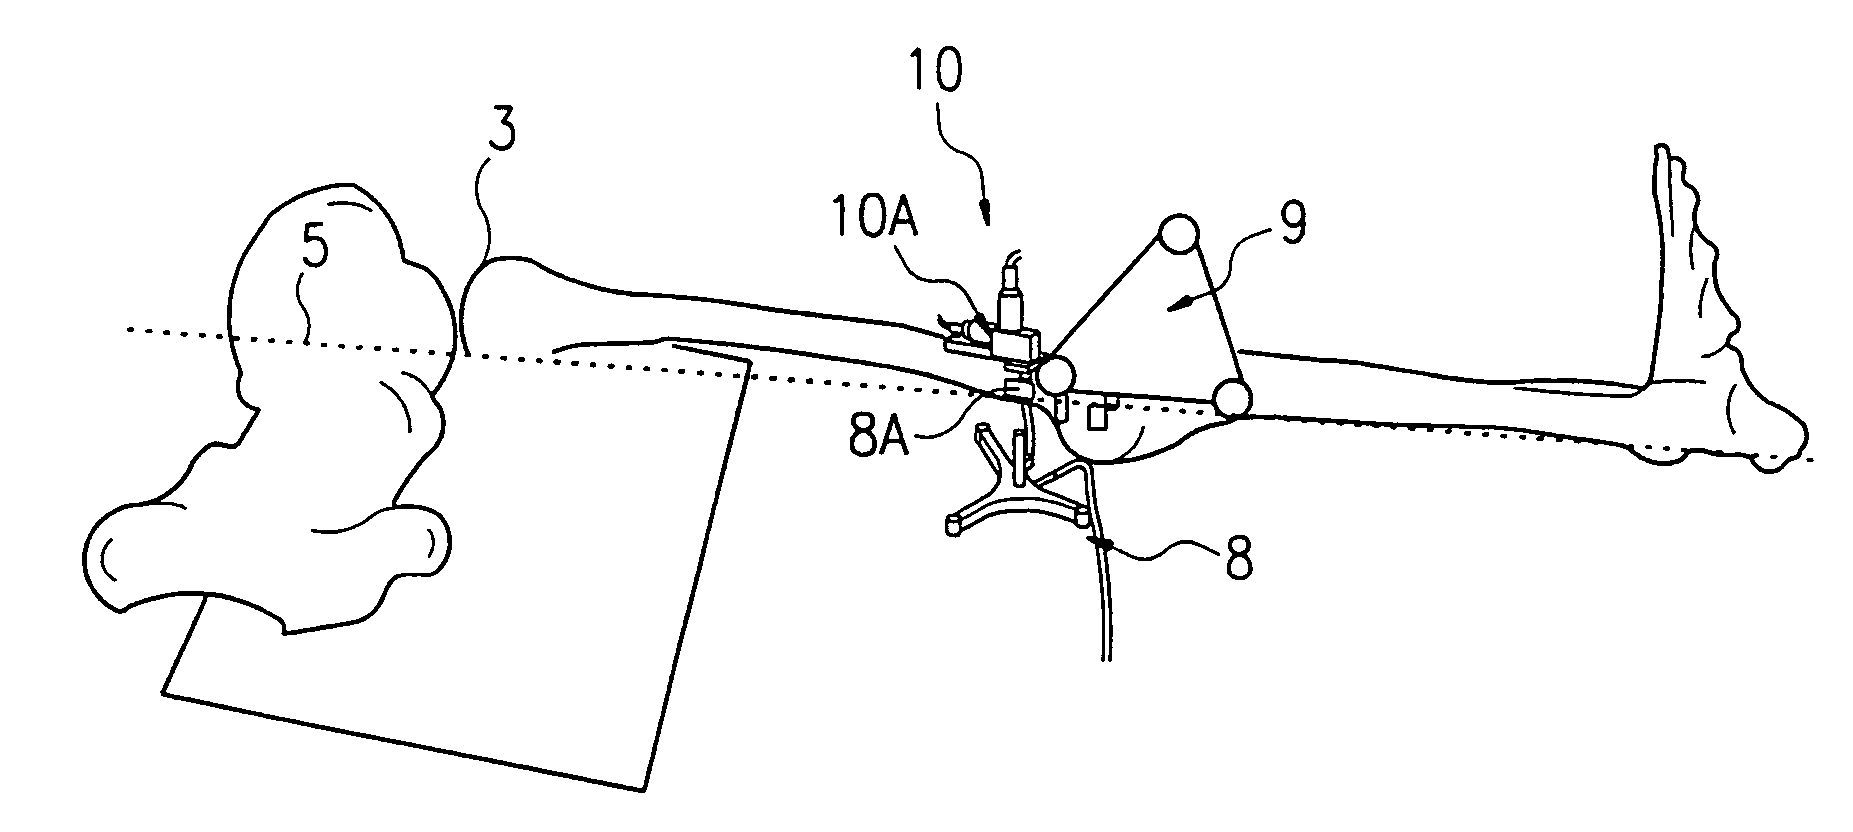 Method and apparatus for finding the position of a mechanical axis of a limb